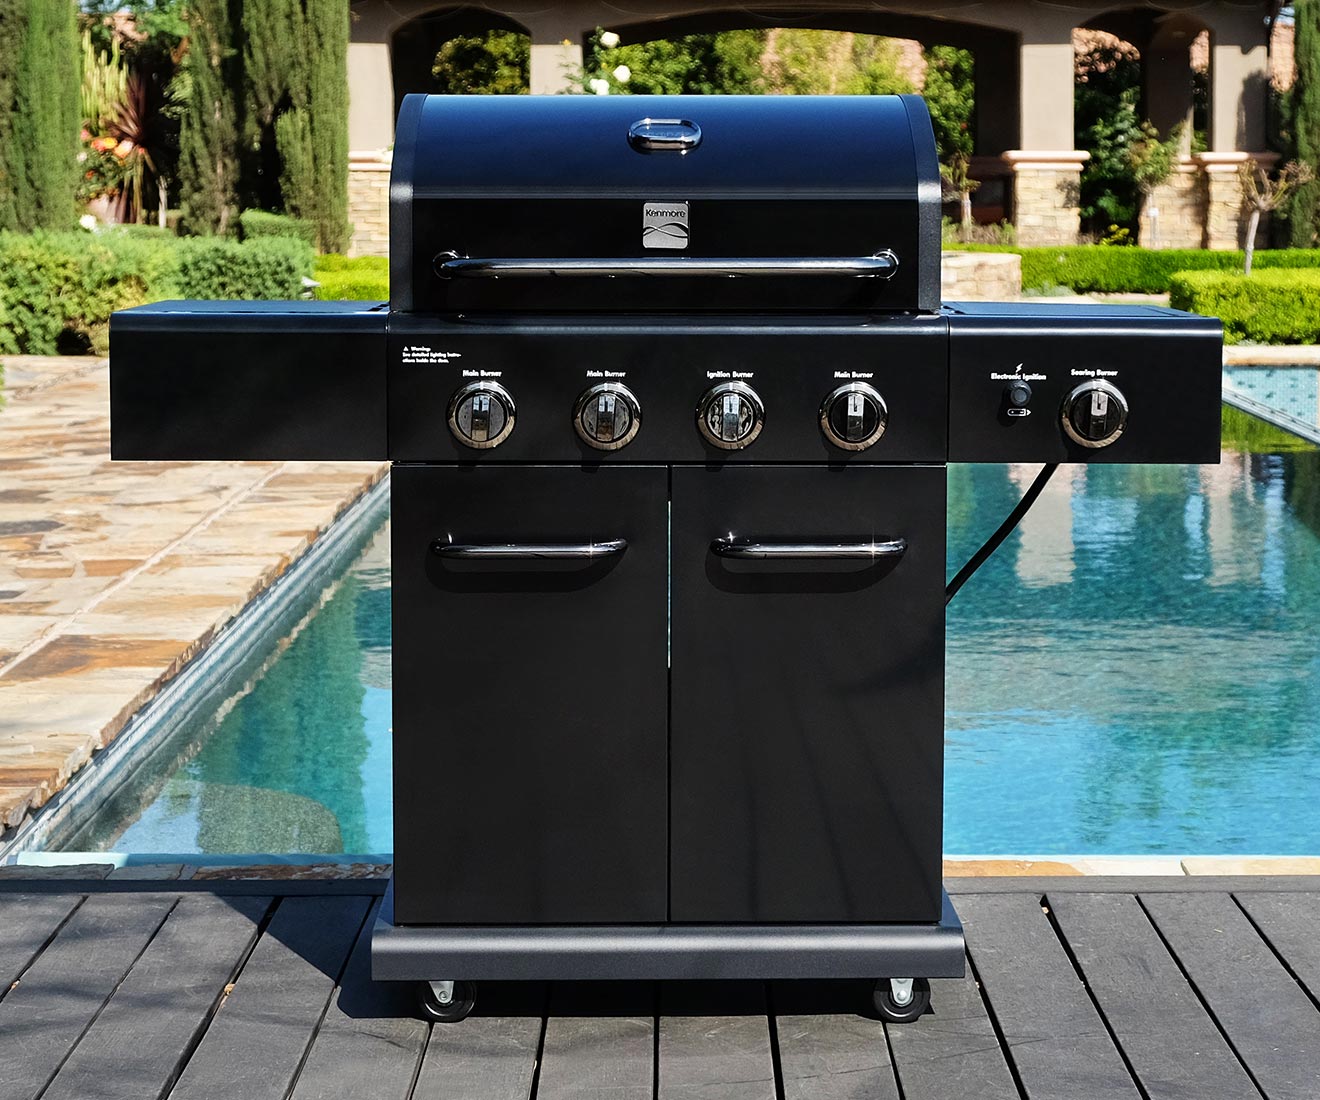 Kenmore 4-Burner Gas Grill with Side Searing Burner Barbecue Barbeque BBQ Grill for Outdoor Outside Cooking PG-40409S0LB-1 in Black with Chrome Accents Elegant Stylish Design Decor for Any Backyard Patio Furniture Poolside Pool Side